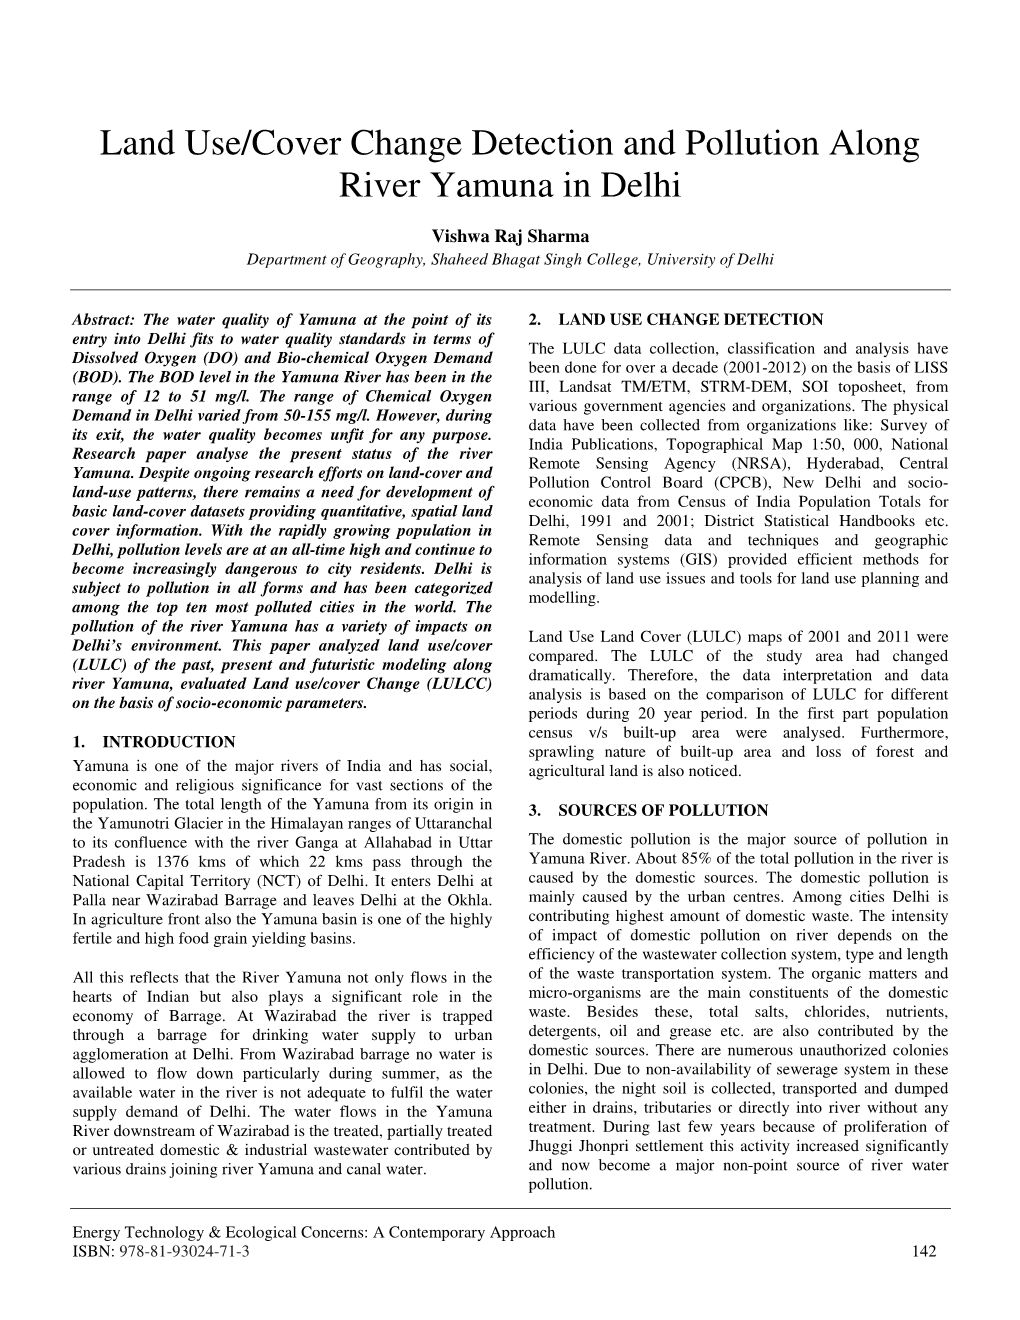 Land Use/Cover Change Detection and Pollution Along River Yamuna in Delhi